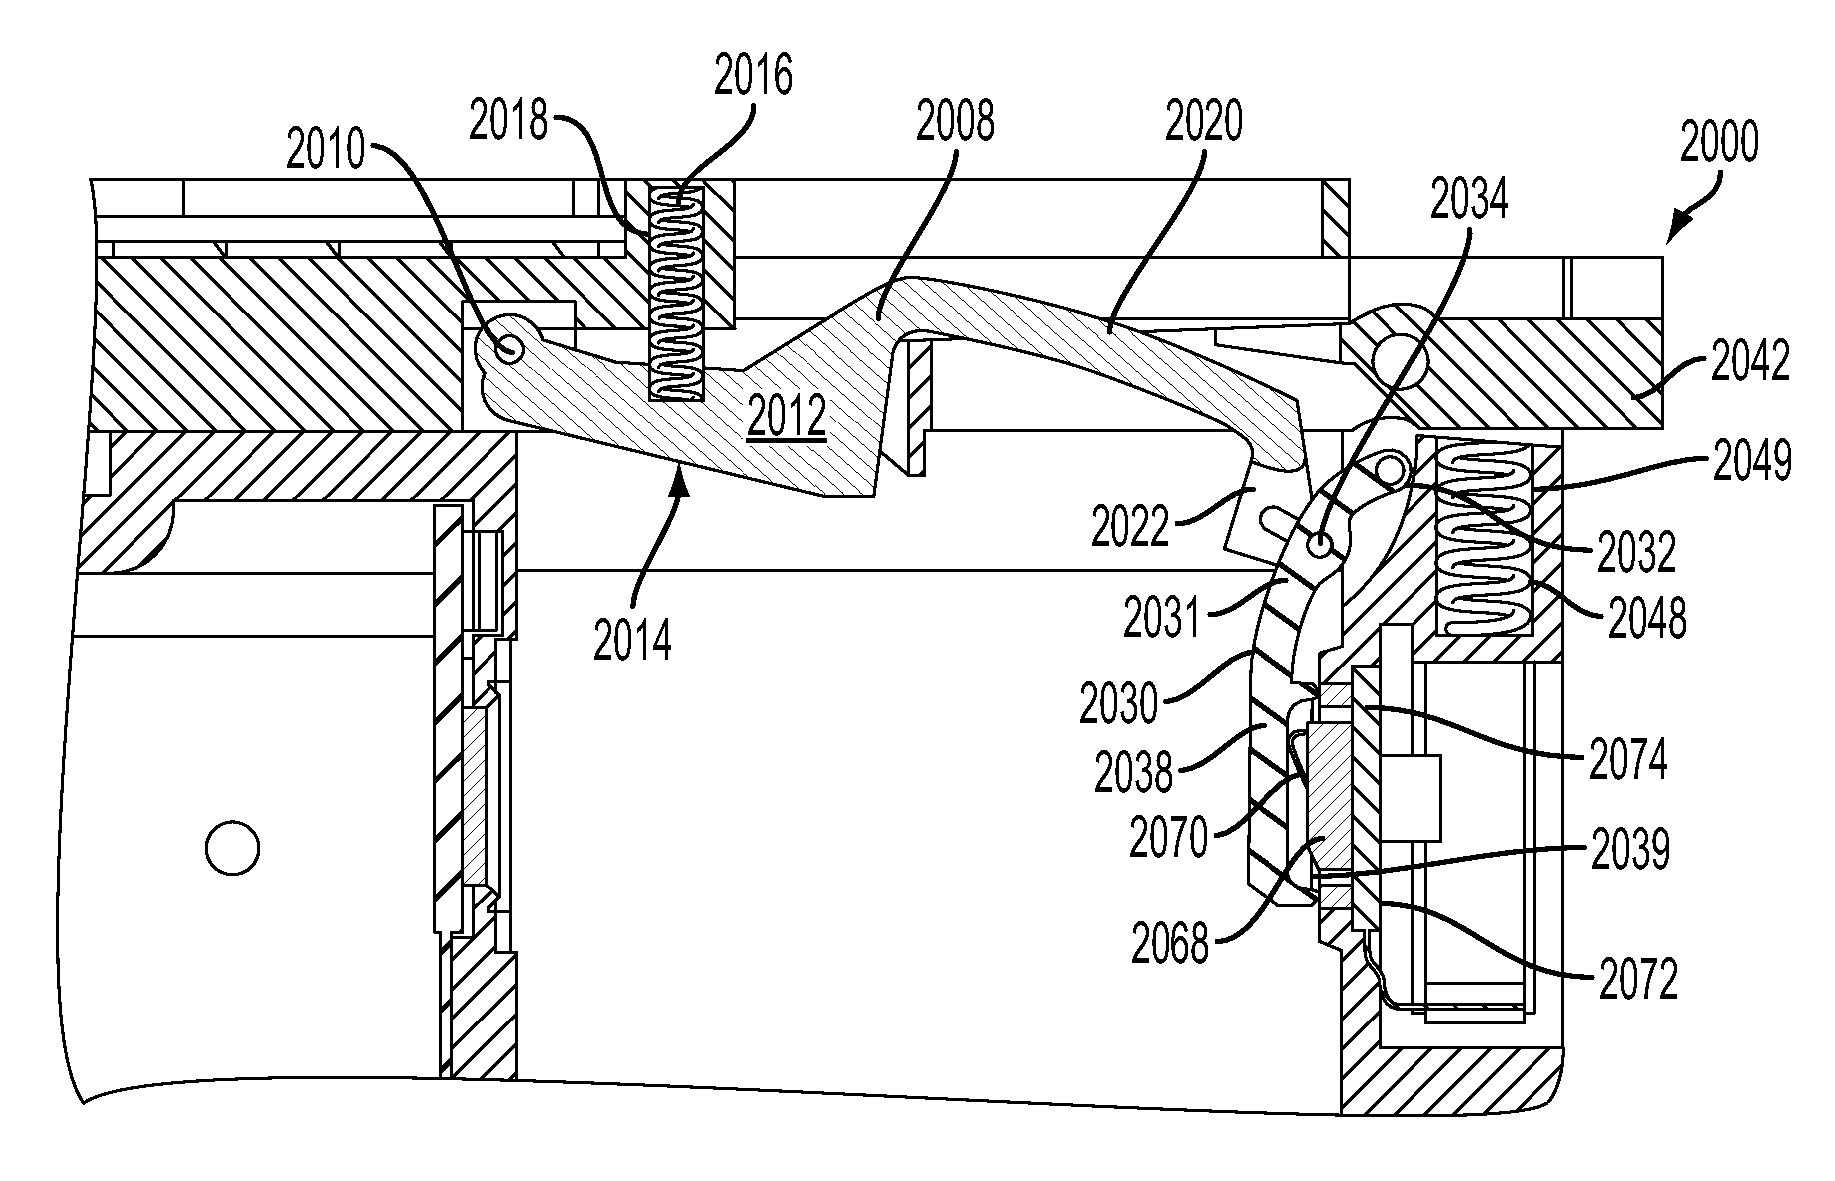 System, method, and apparatus for clamping